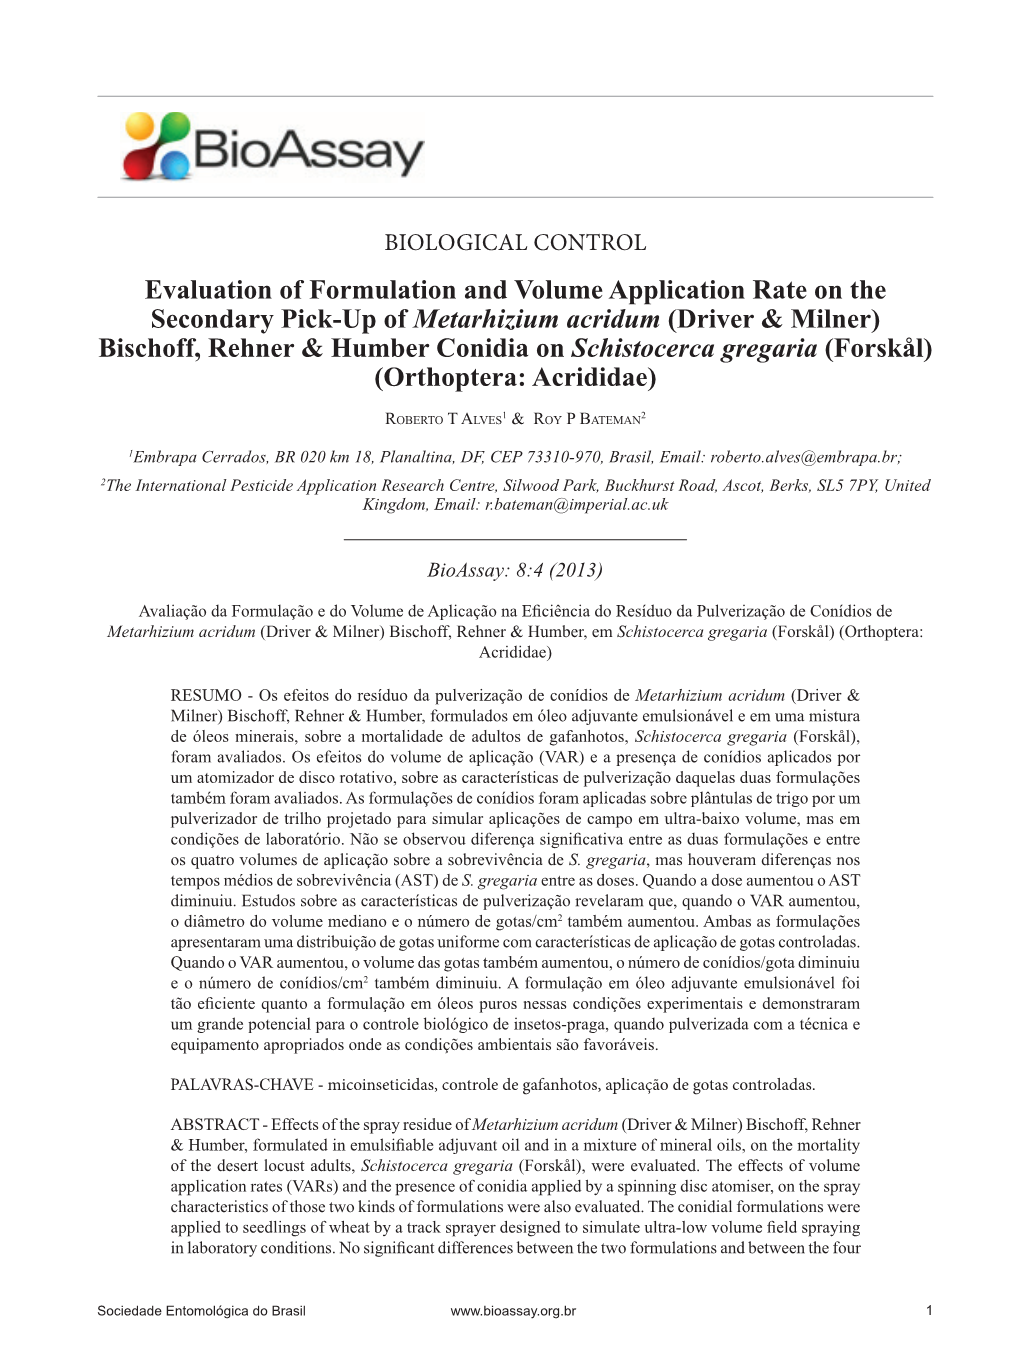 Evaluation of Formulation and Volume Application Rate on the Secondary